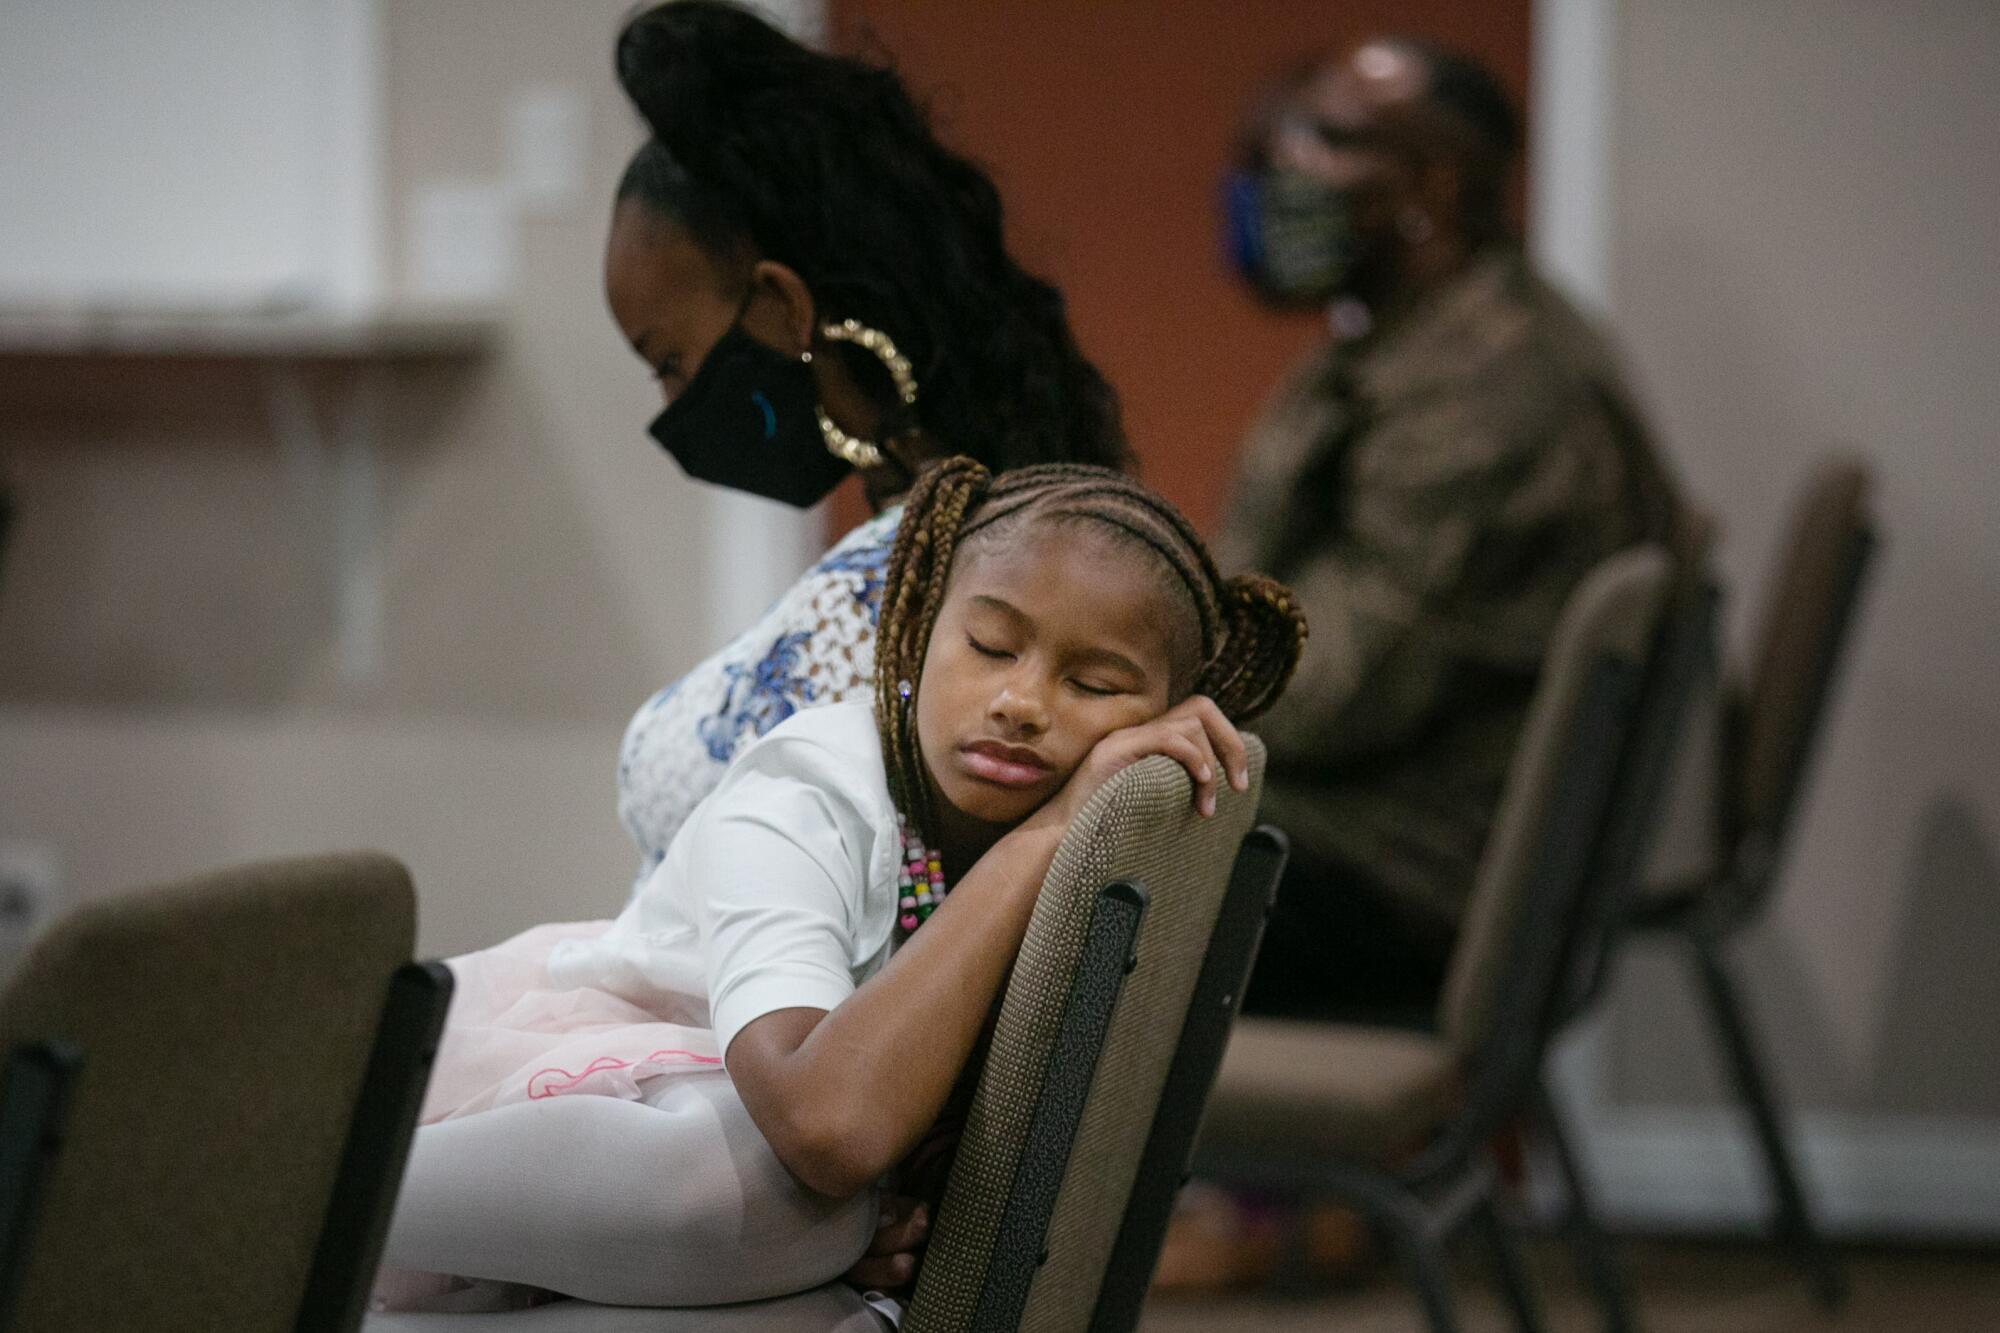 A young girls asleep in a chair at church.